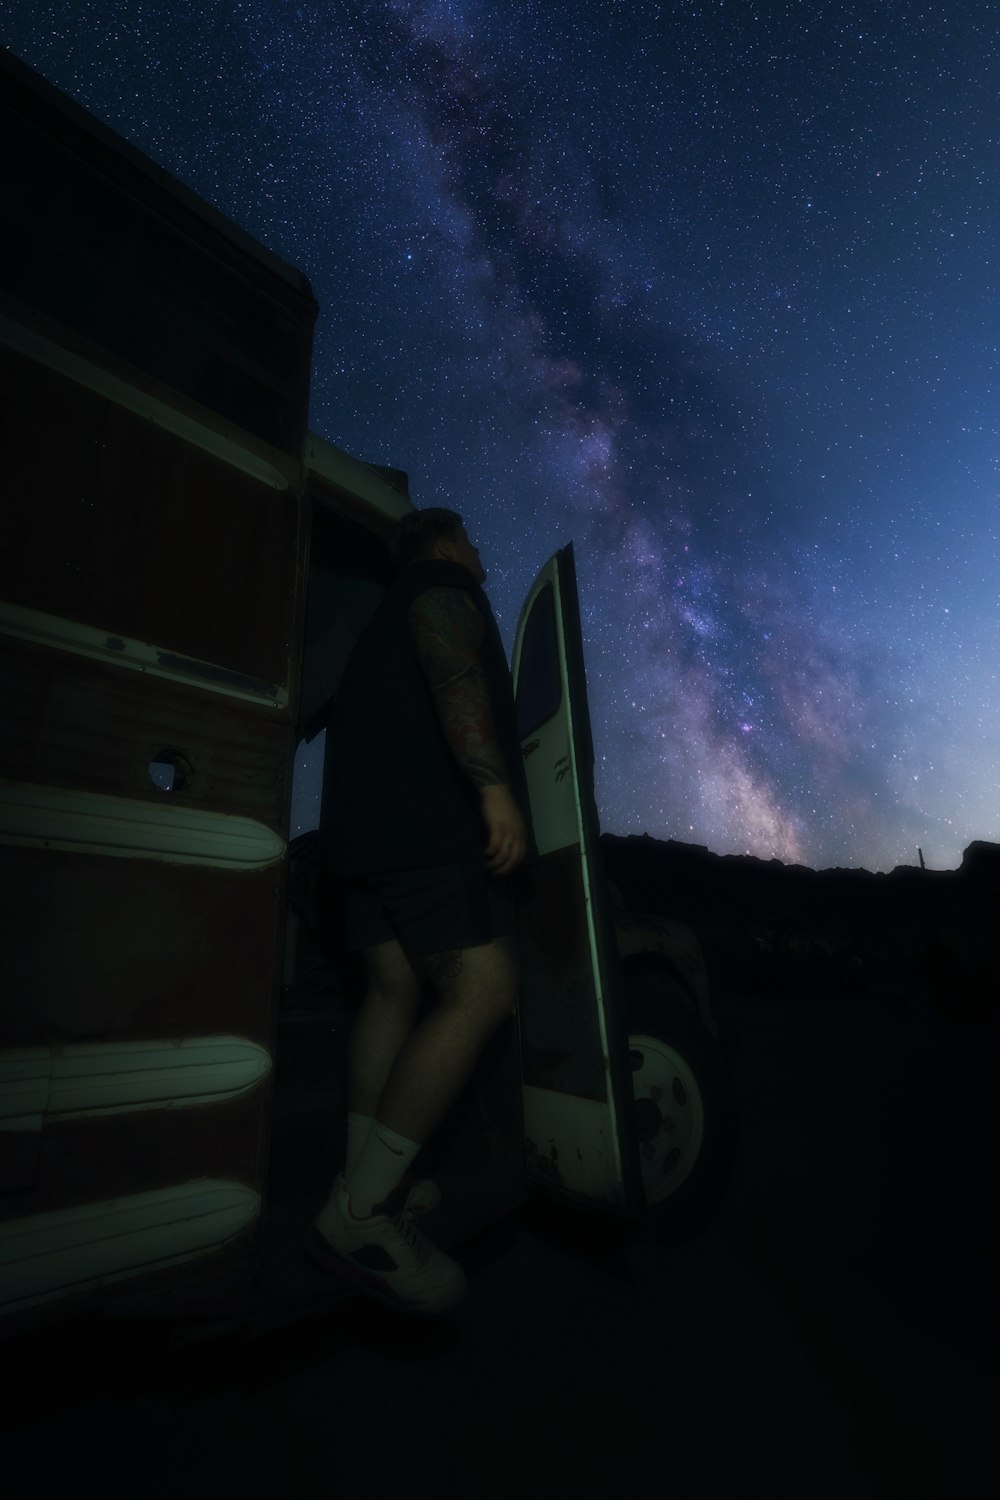 man in black shorts sitting on white and black car under starry night